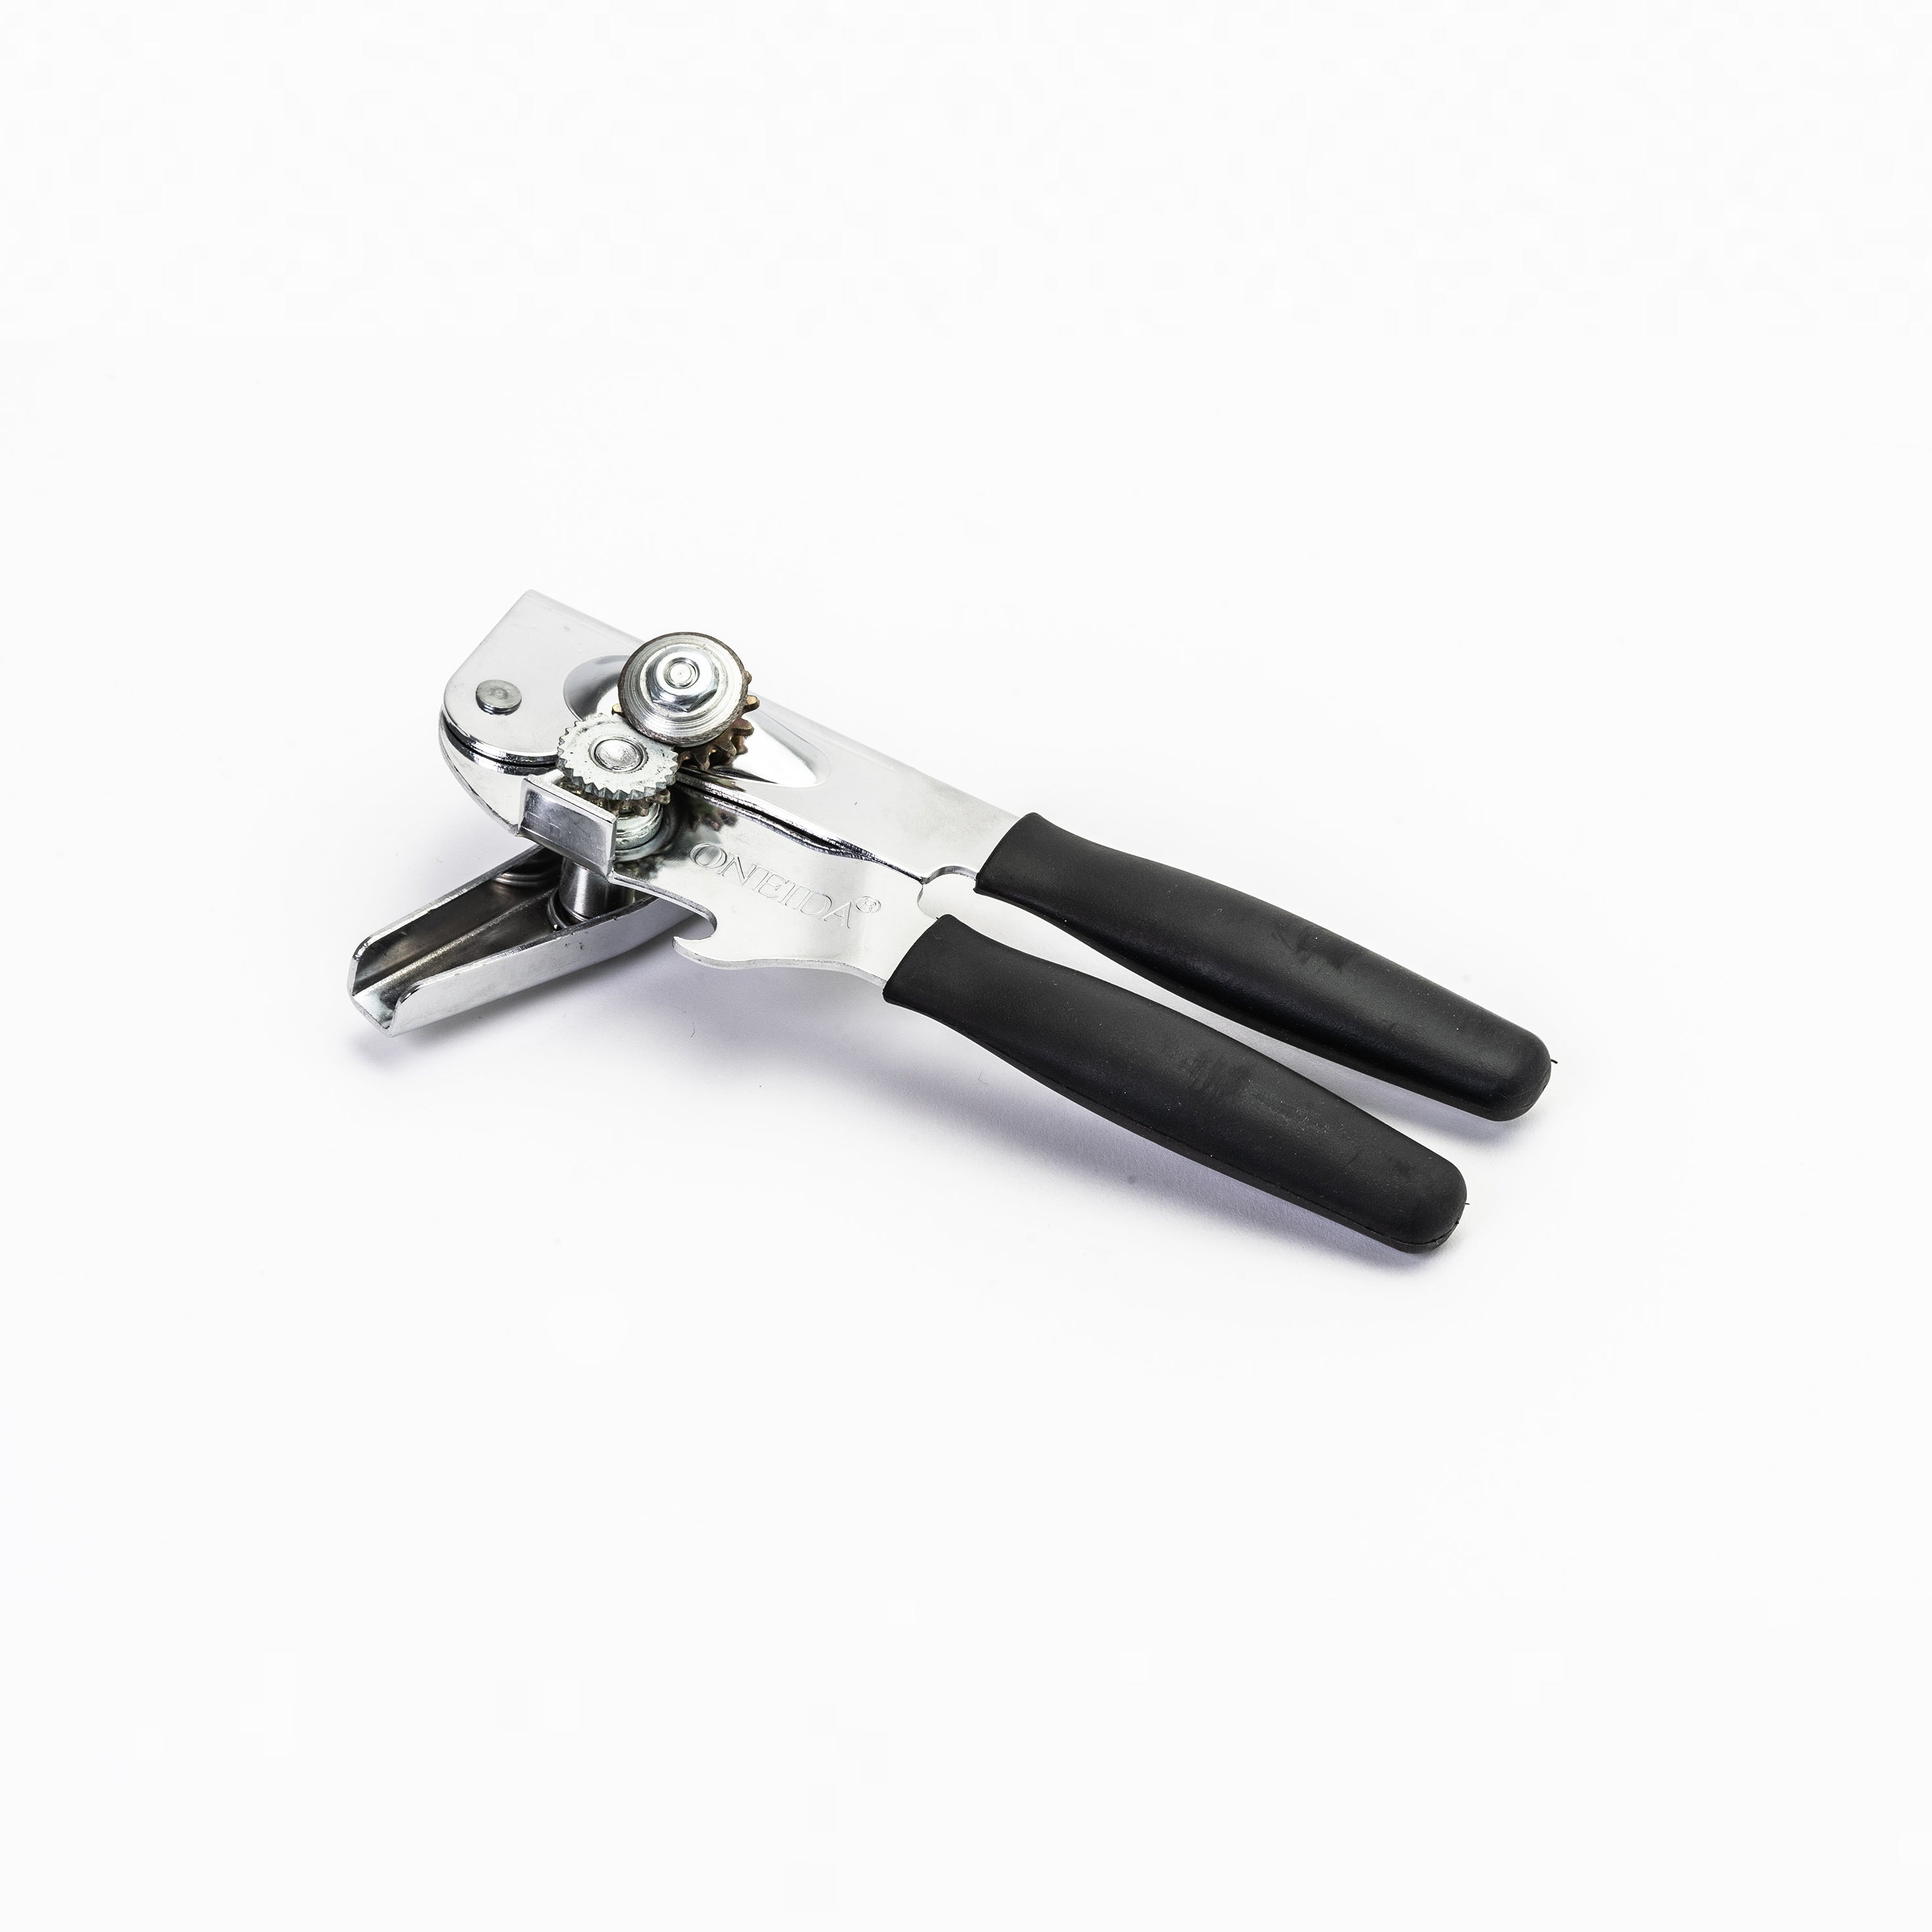 Adcraft 407 Can Opener